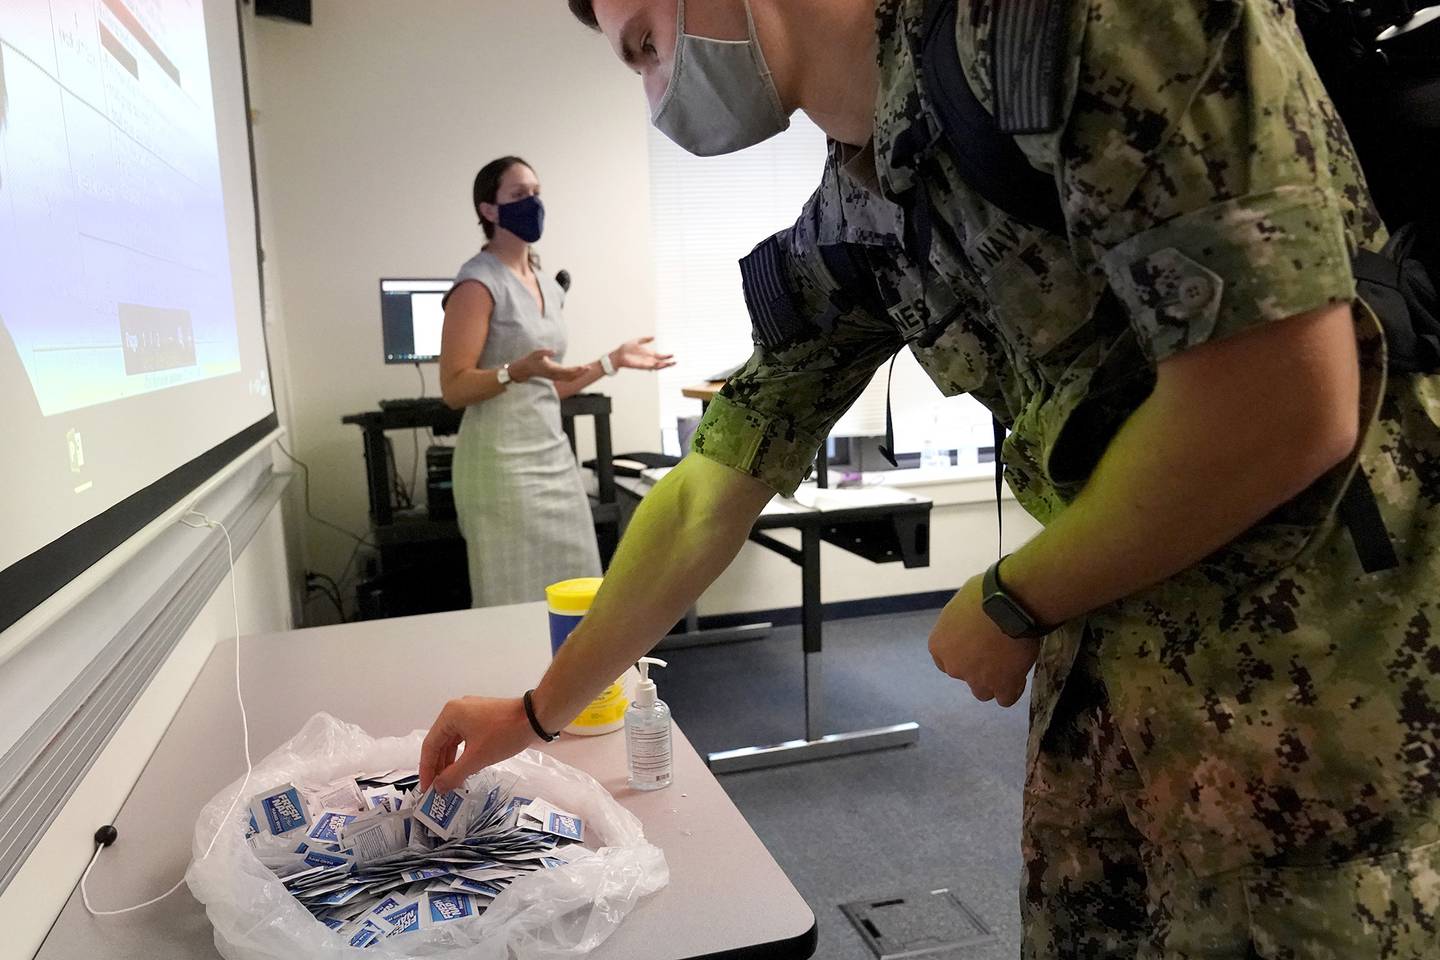 A midshipman reaches for sanitizing wipes while arriving to a leadership class taught by professor Celeste Luning, left, at the U.S. Naval Academy, Monday, Aug. 24, 2020, in Annapolis, Md.